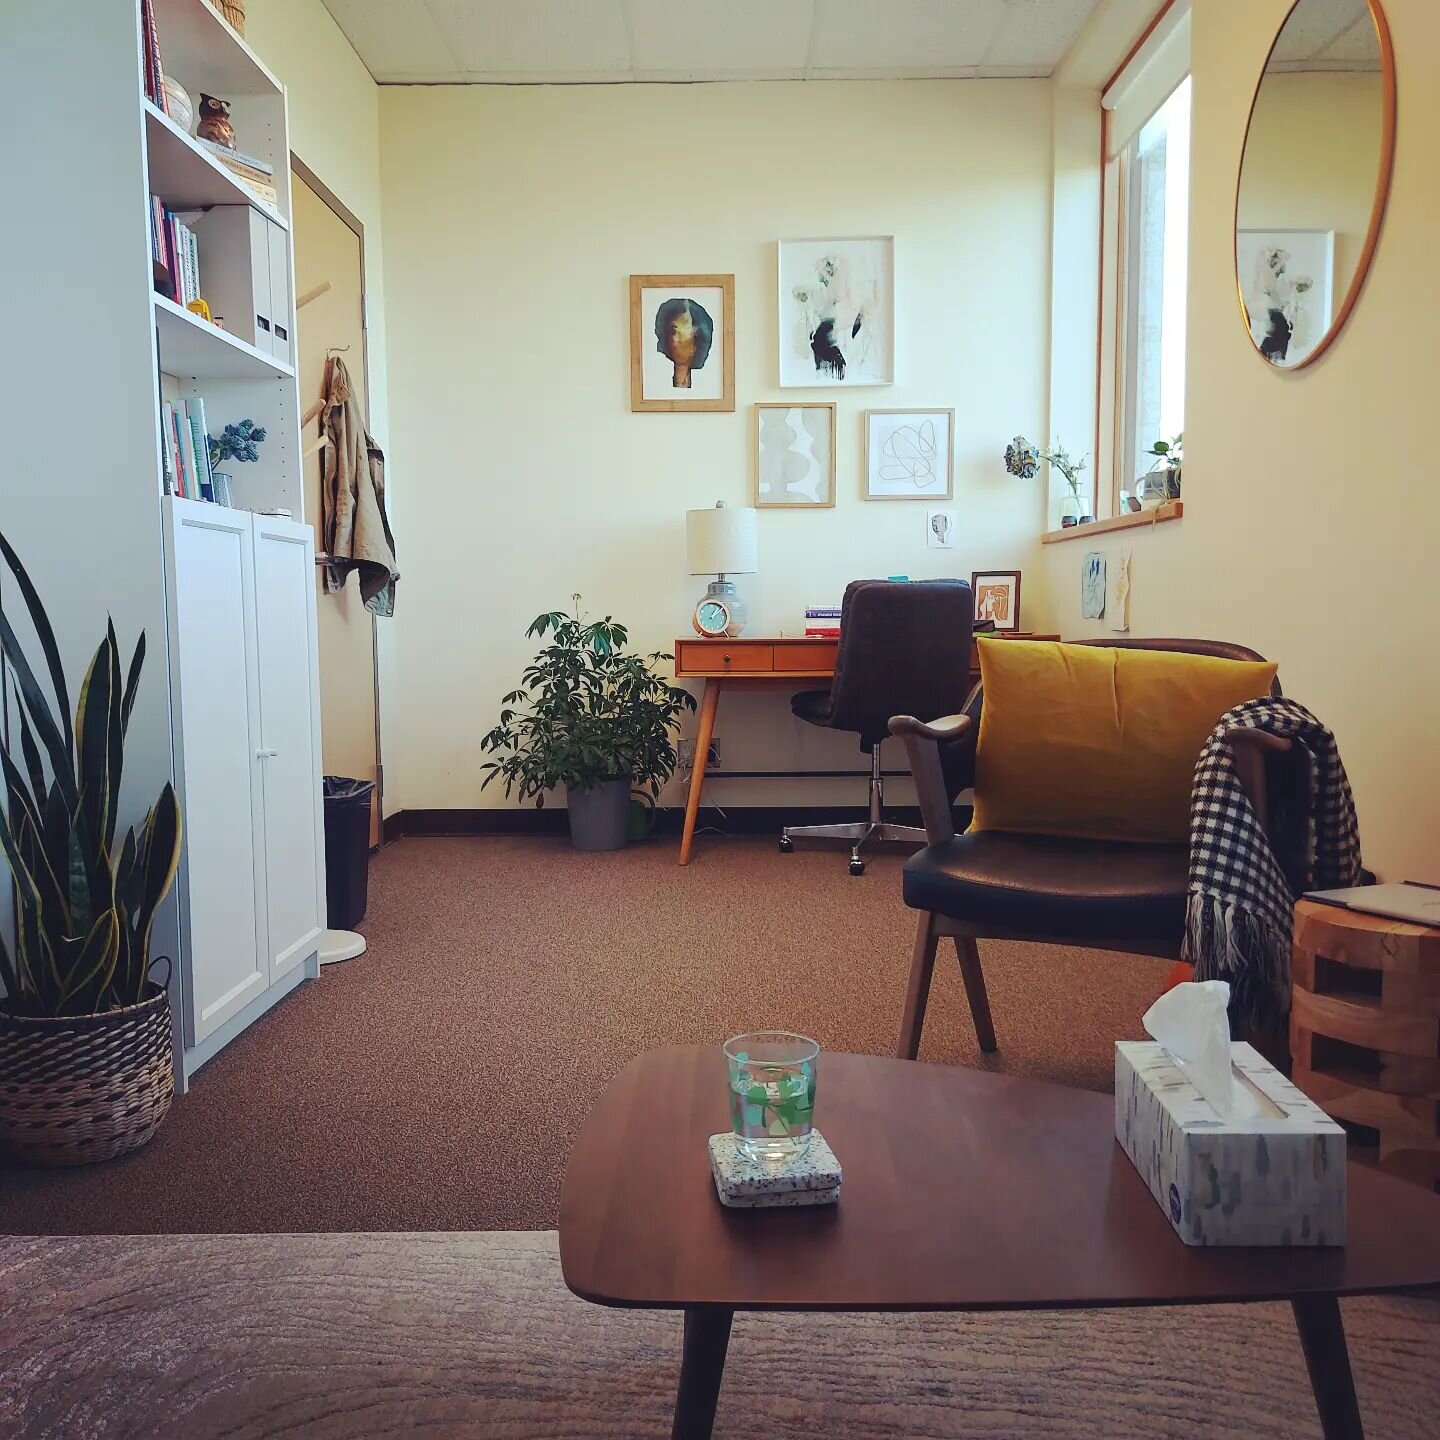 What clients see while working with me at Rocca Family Therapy

#steinbachtherapist 
#roccafamilytherapy 
#therapyoffice 
#steinbachmentalhealth 
#steinbachcounselling